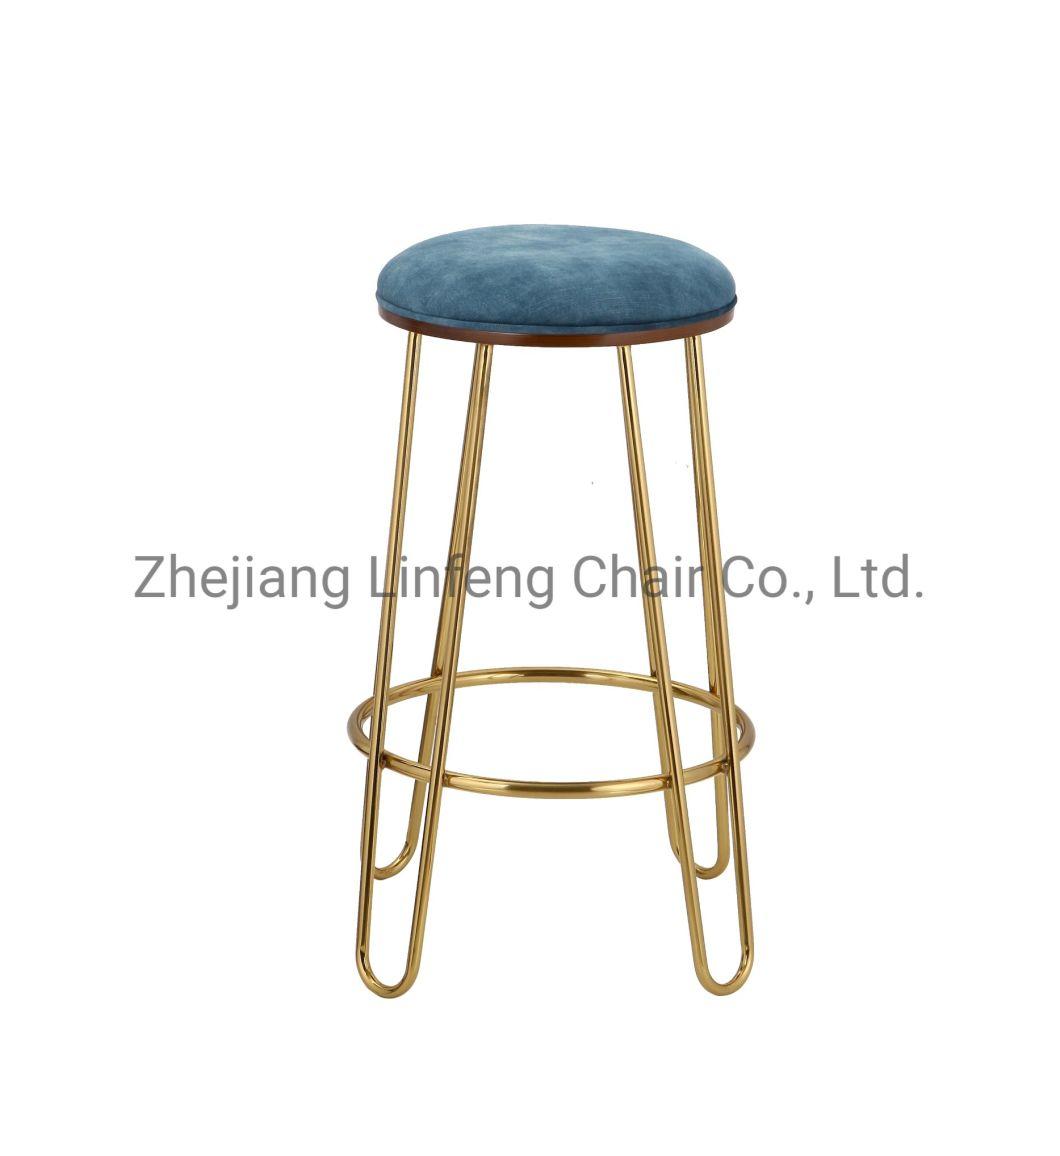 Chair Bar Counter Wholesale French Tall Table Restaurant Furniture Iron Luxury High Modern Gold Metal Stool Chair